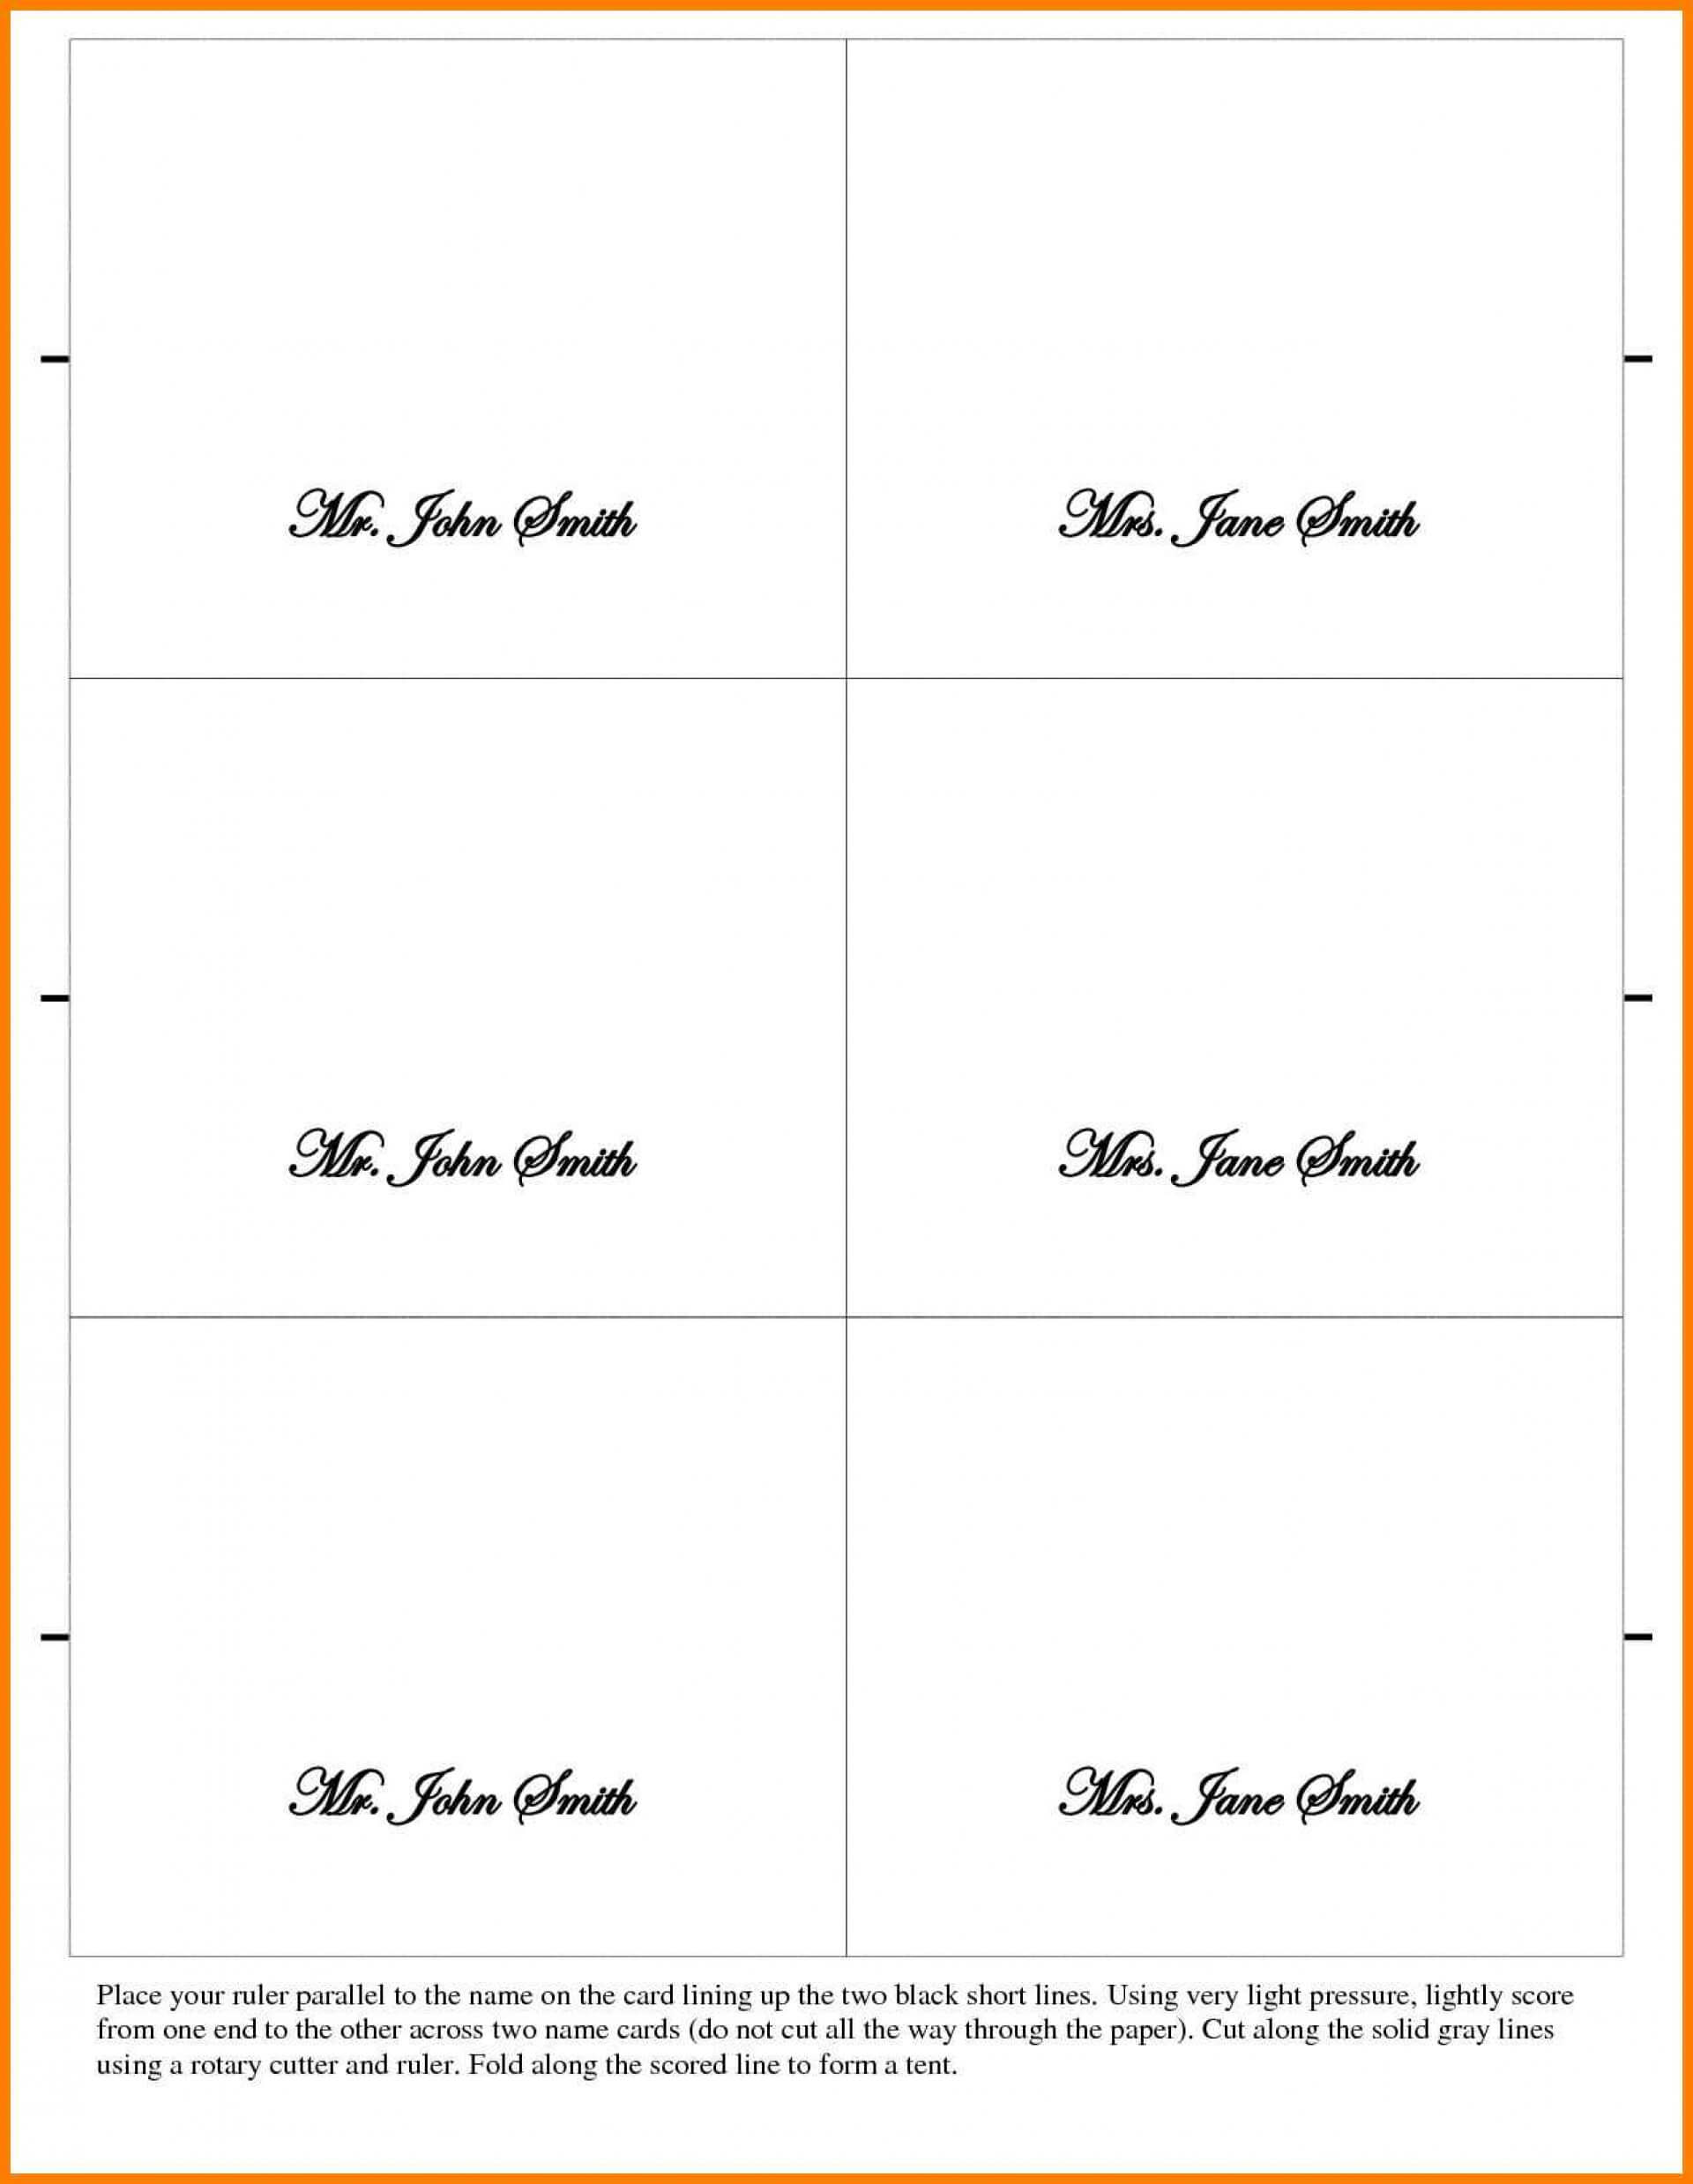 033 Place Card Template Word Flat 1024X1024V1462918202 For Imprintable Place Cards Template